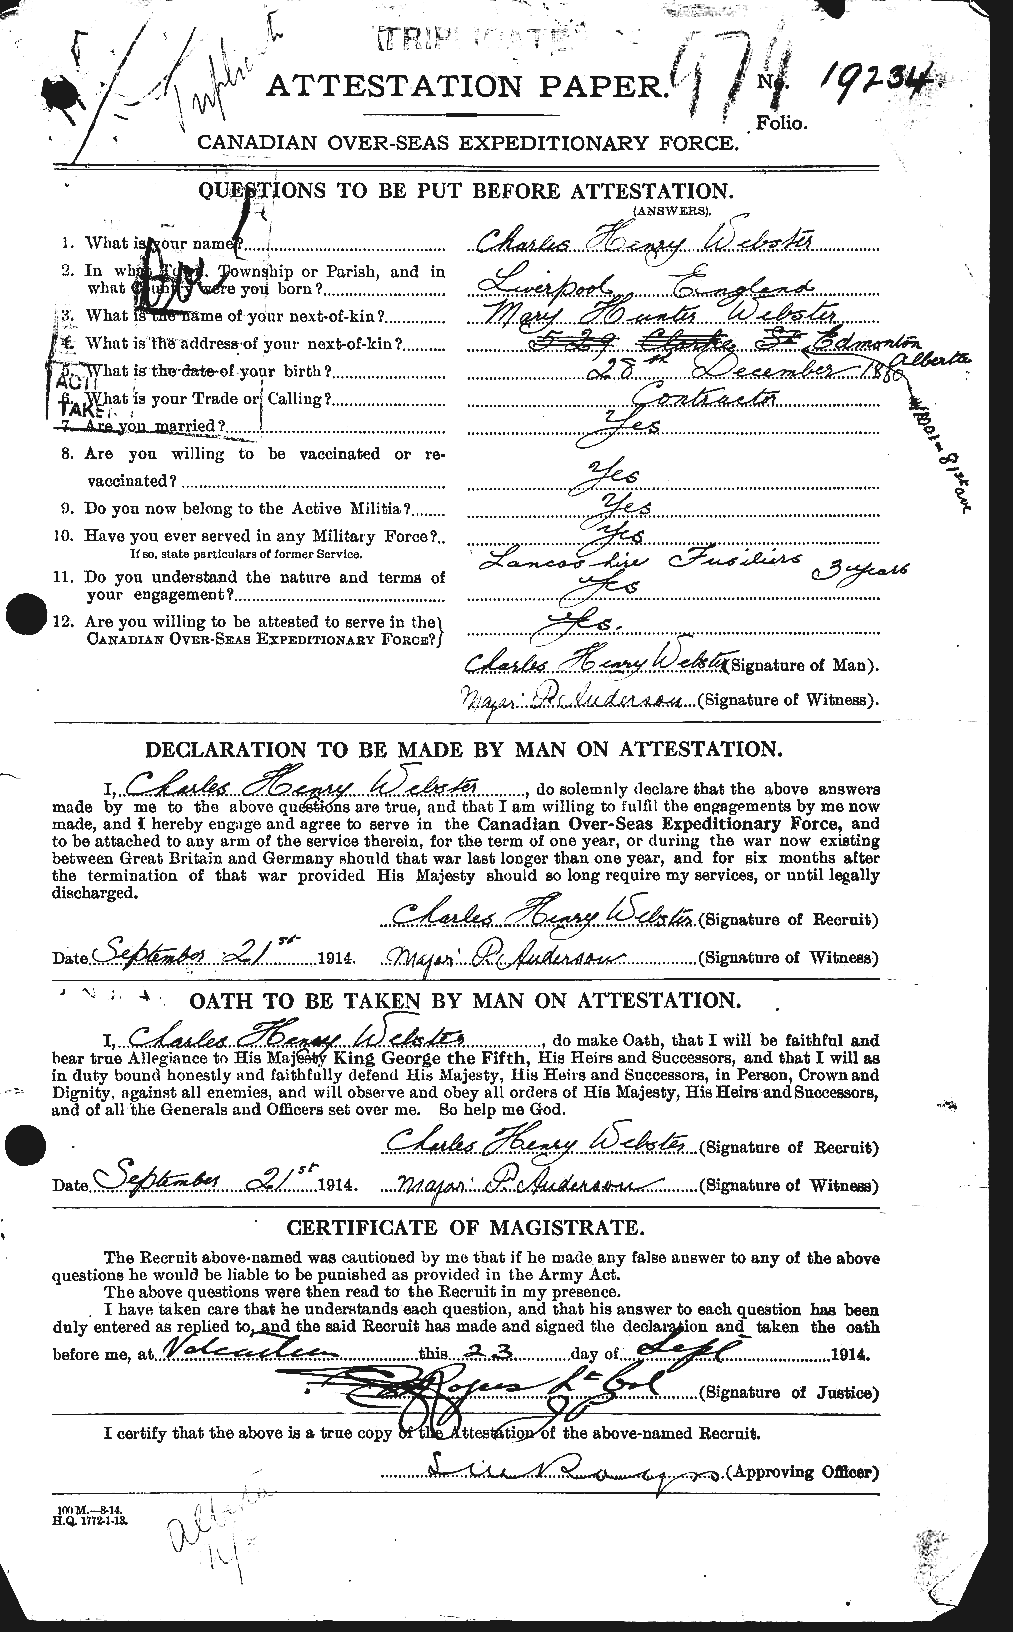 Personnel Records of the First World War - CEF 670296a